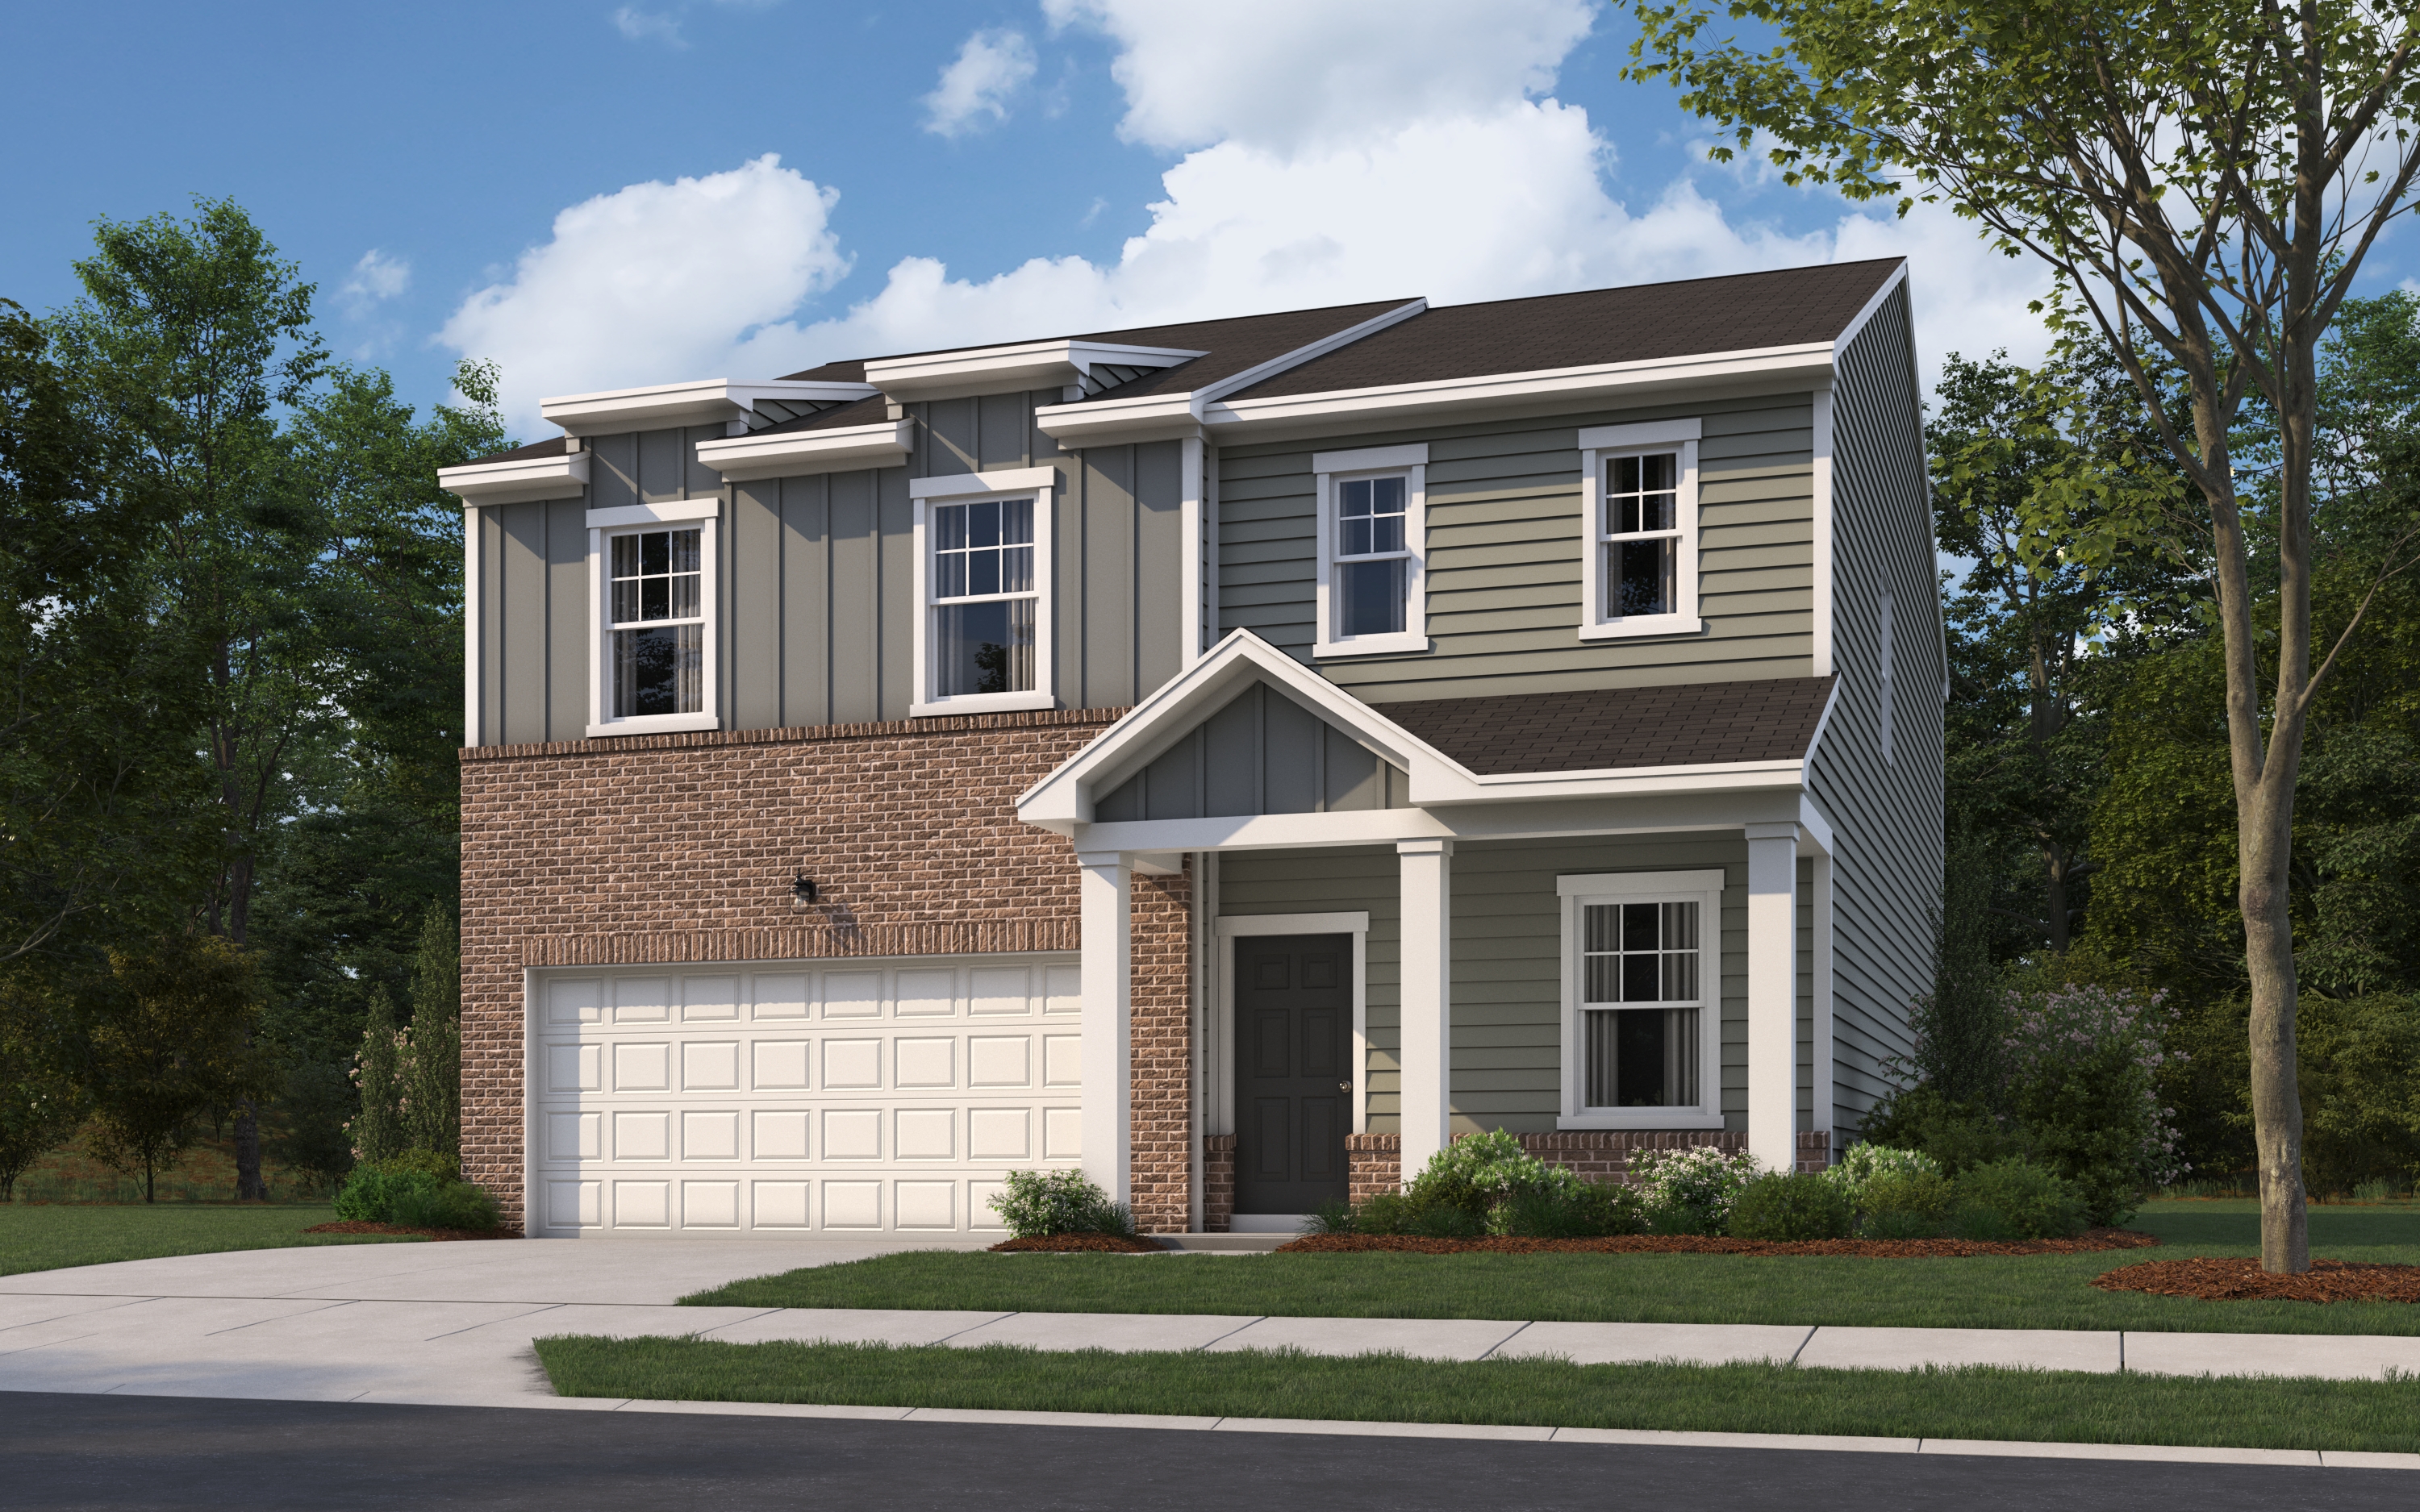 Check out our Spectra plan in our Angier neighborhood, Lynn Ridge!